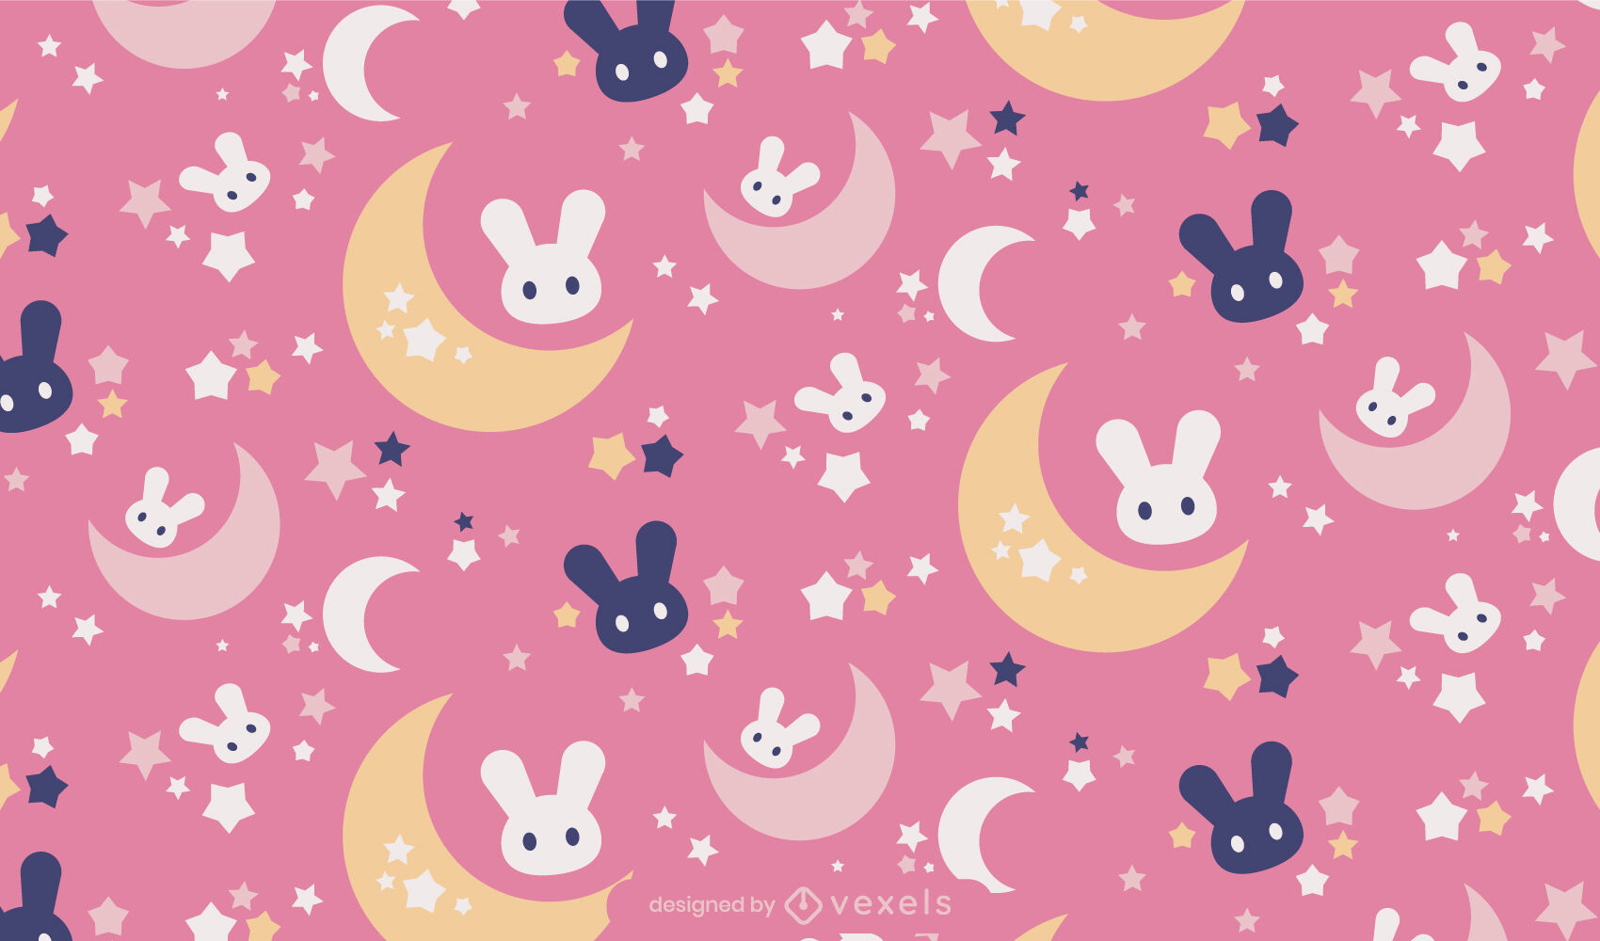 Space bunny rabbits cute pattern design